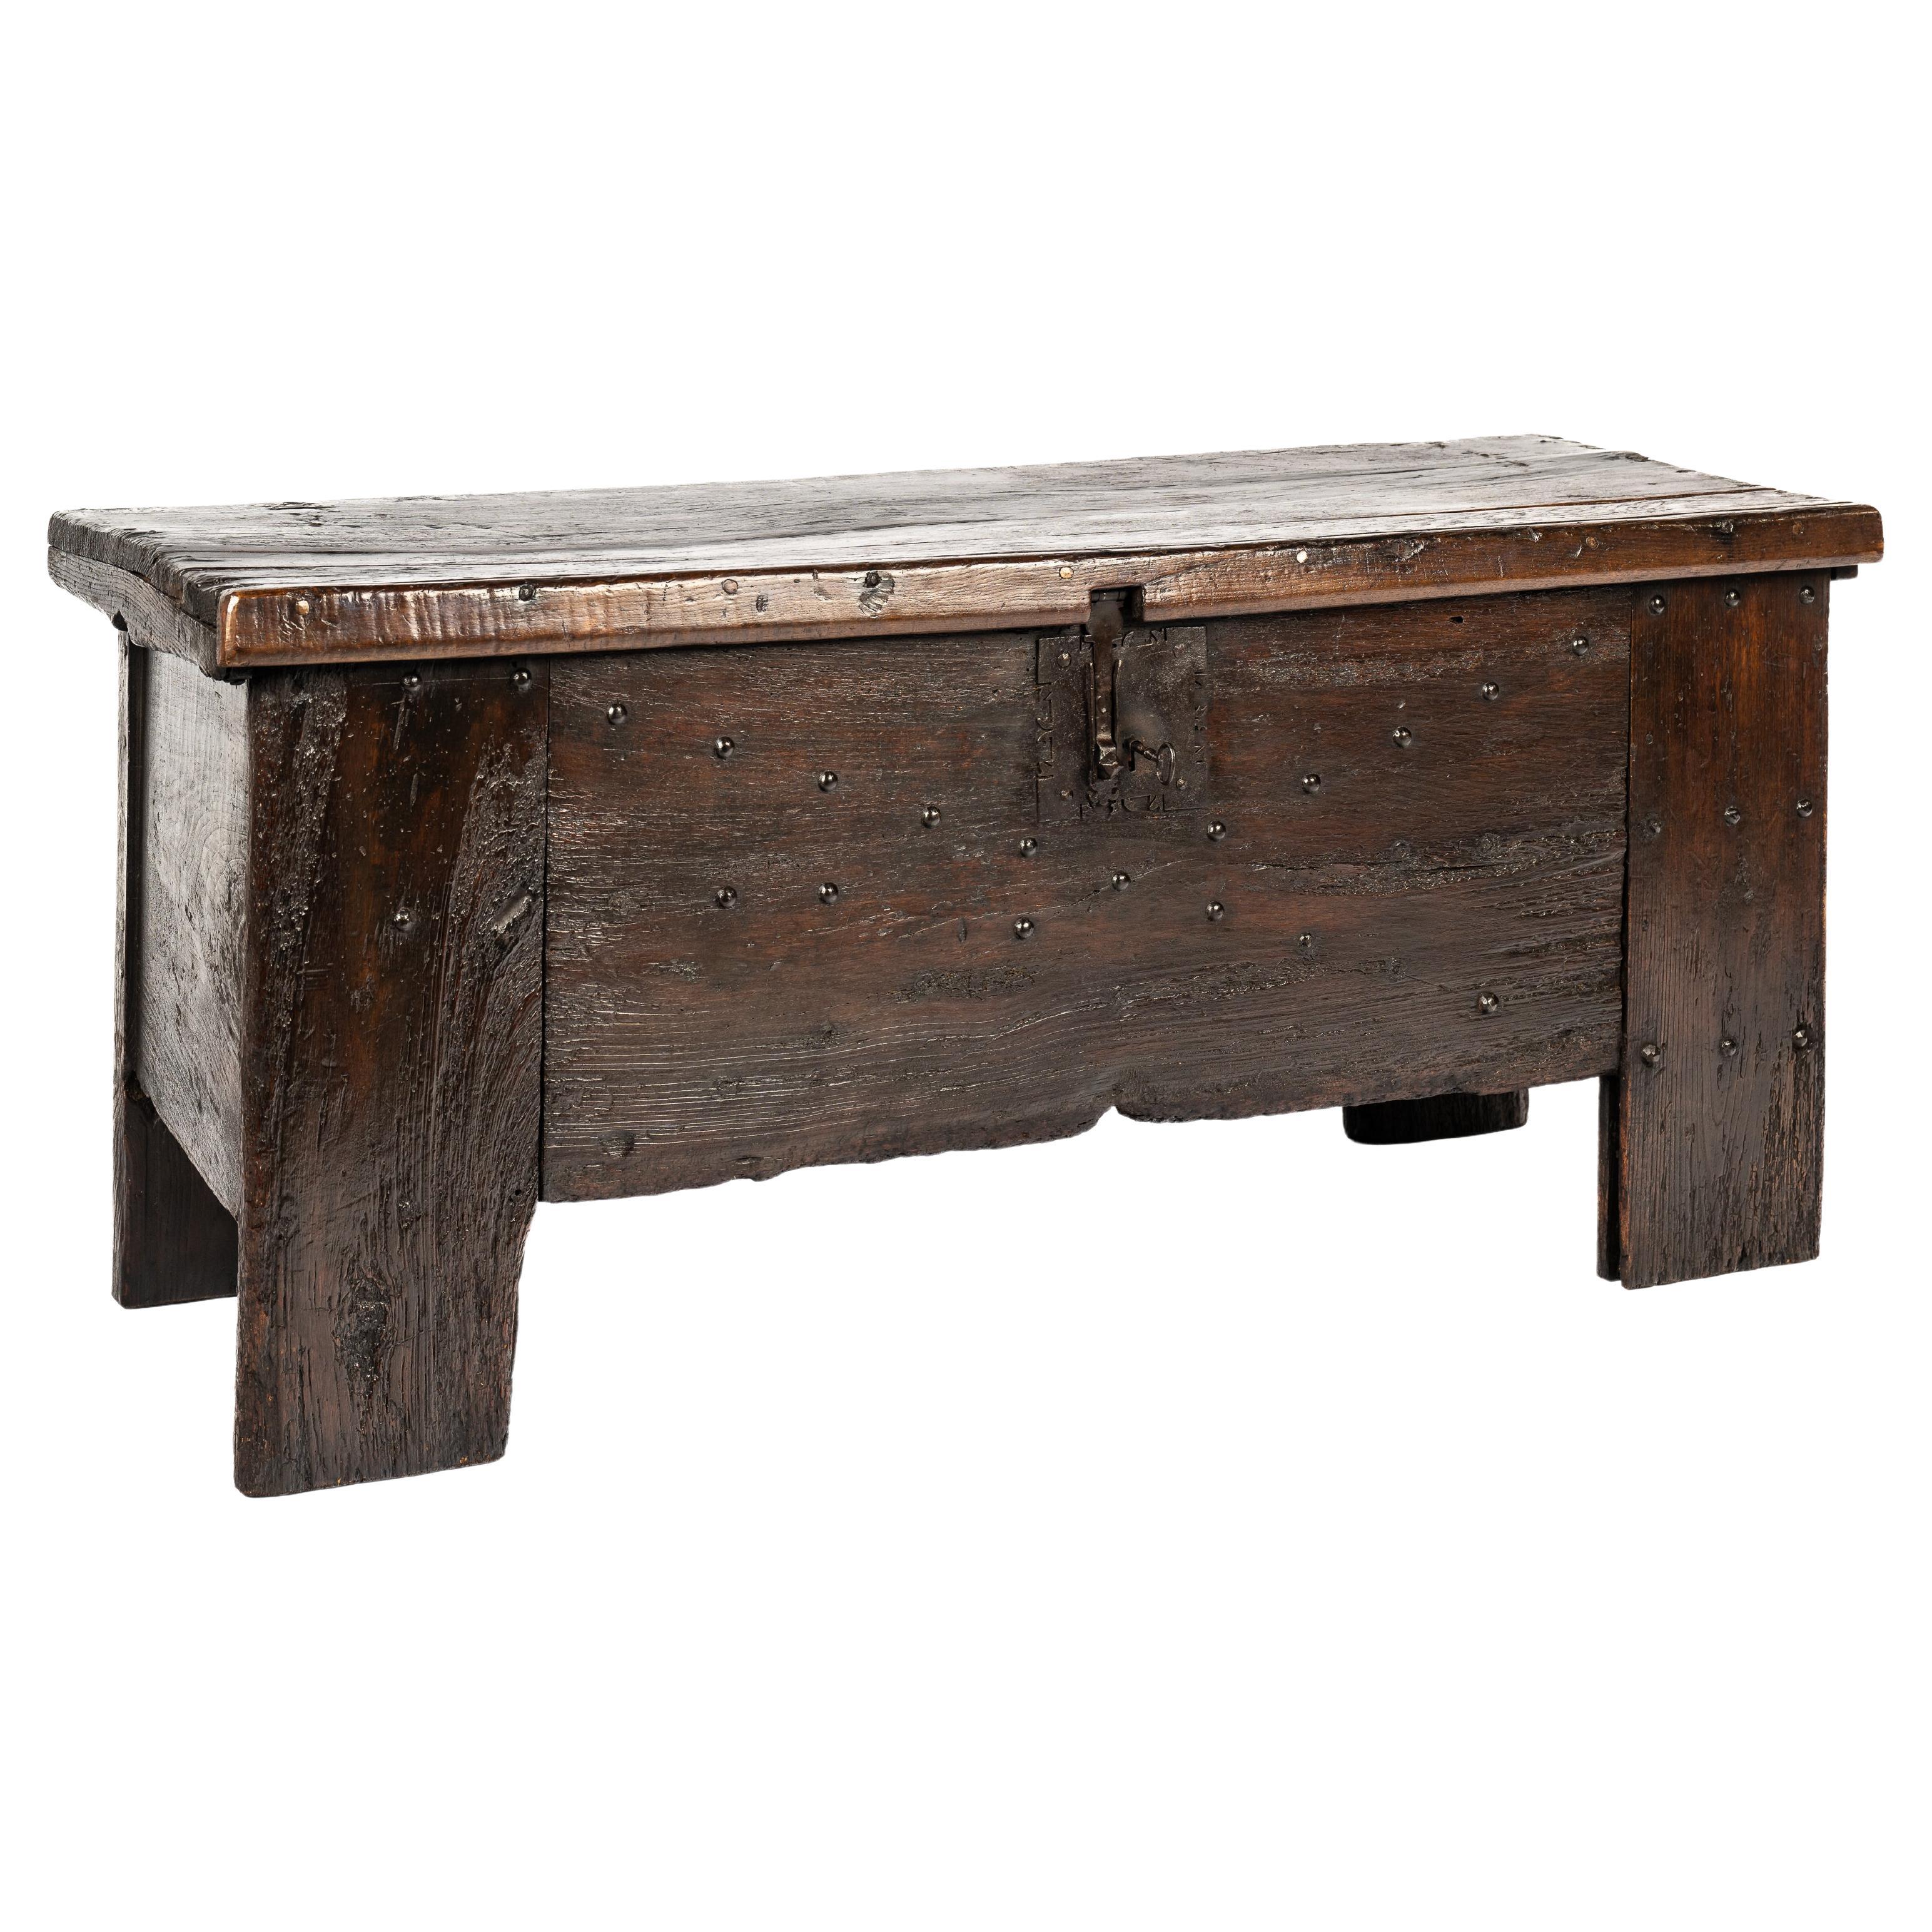 Antique Early 17th Century Spanish Dark Brown Chestnut Wood Trunk or Chest  For Sale